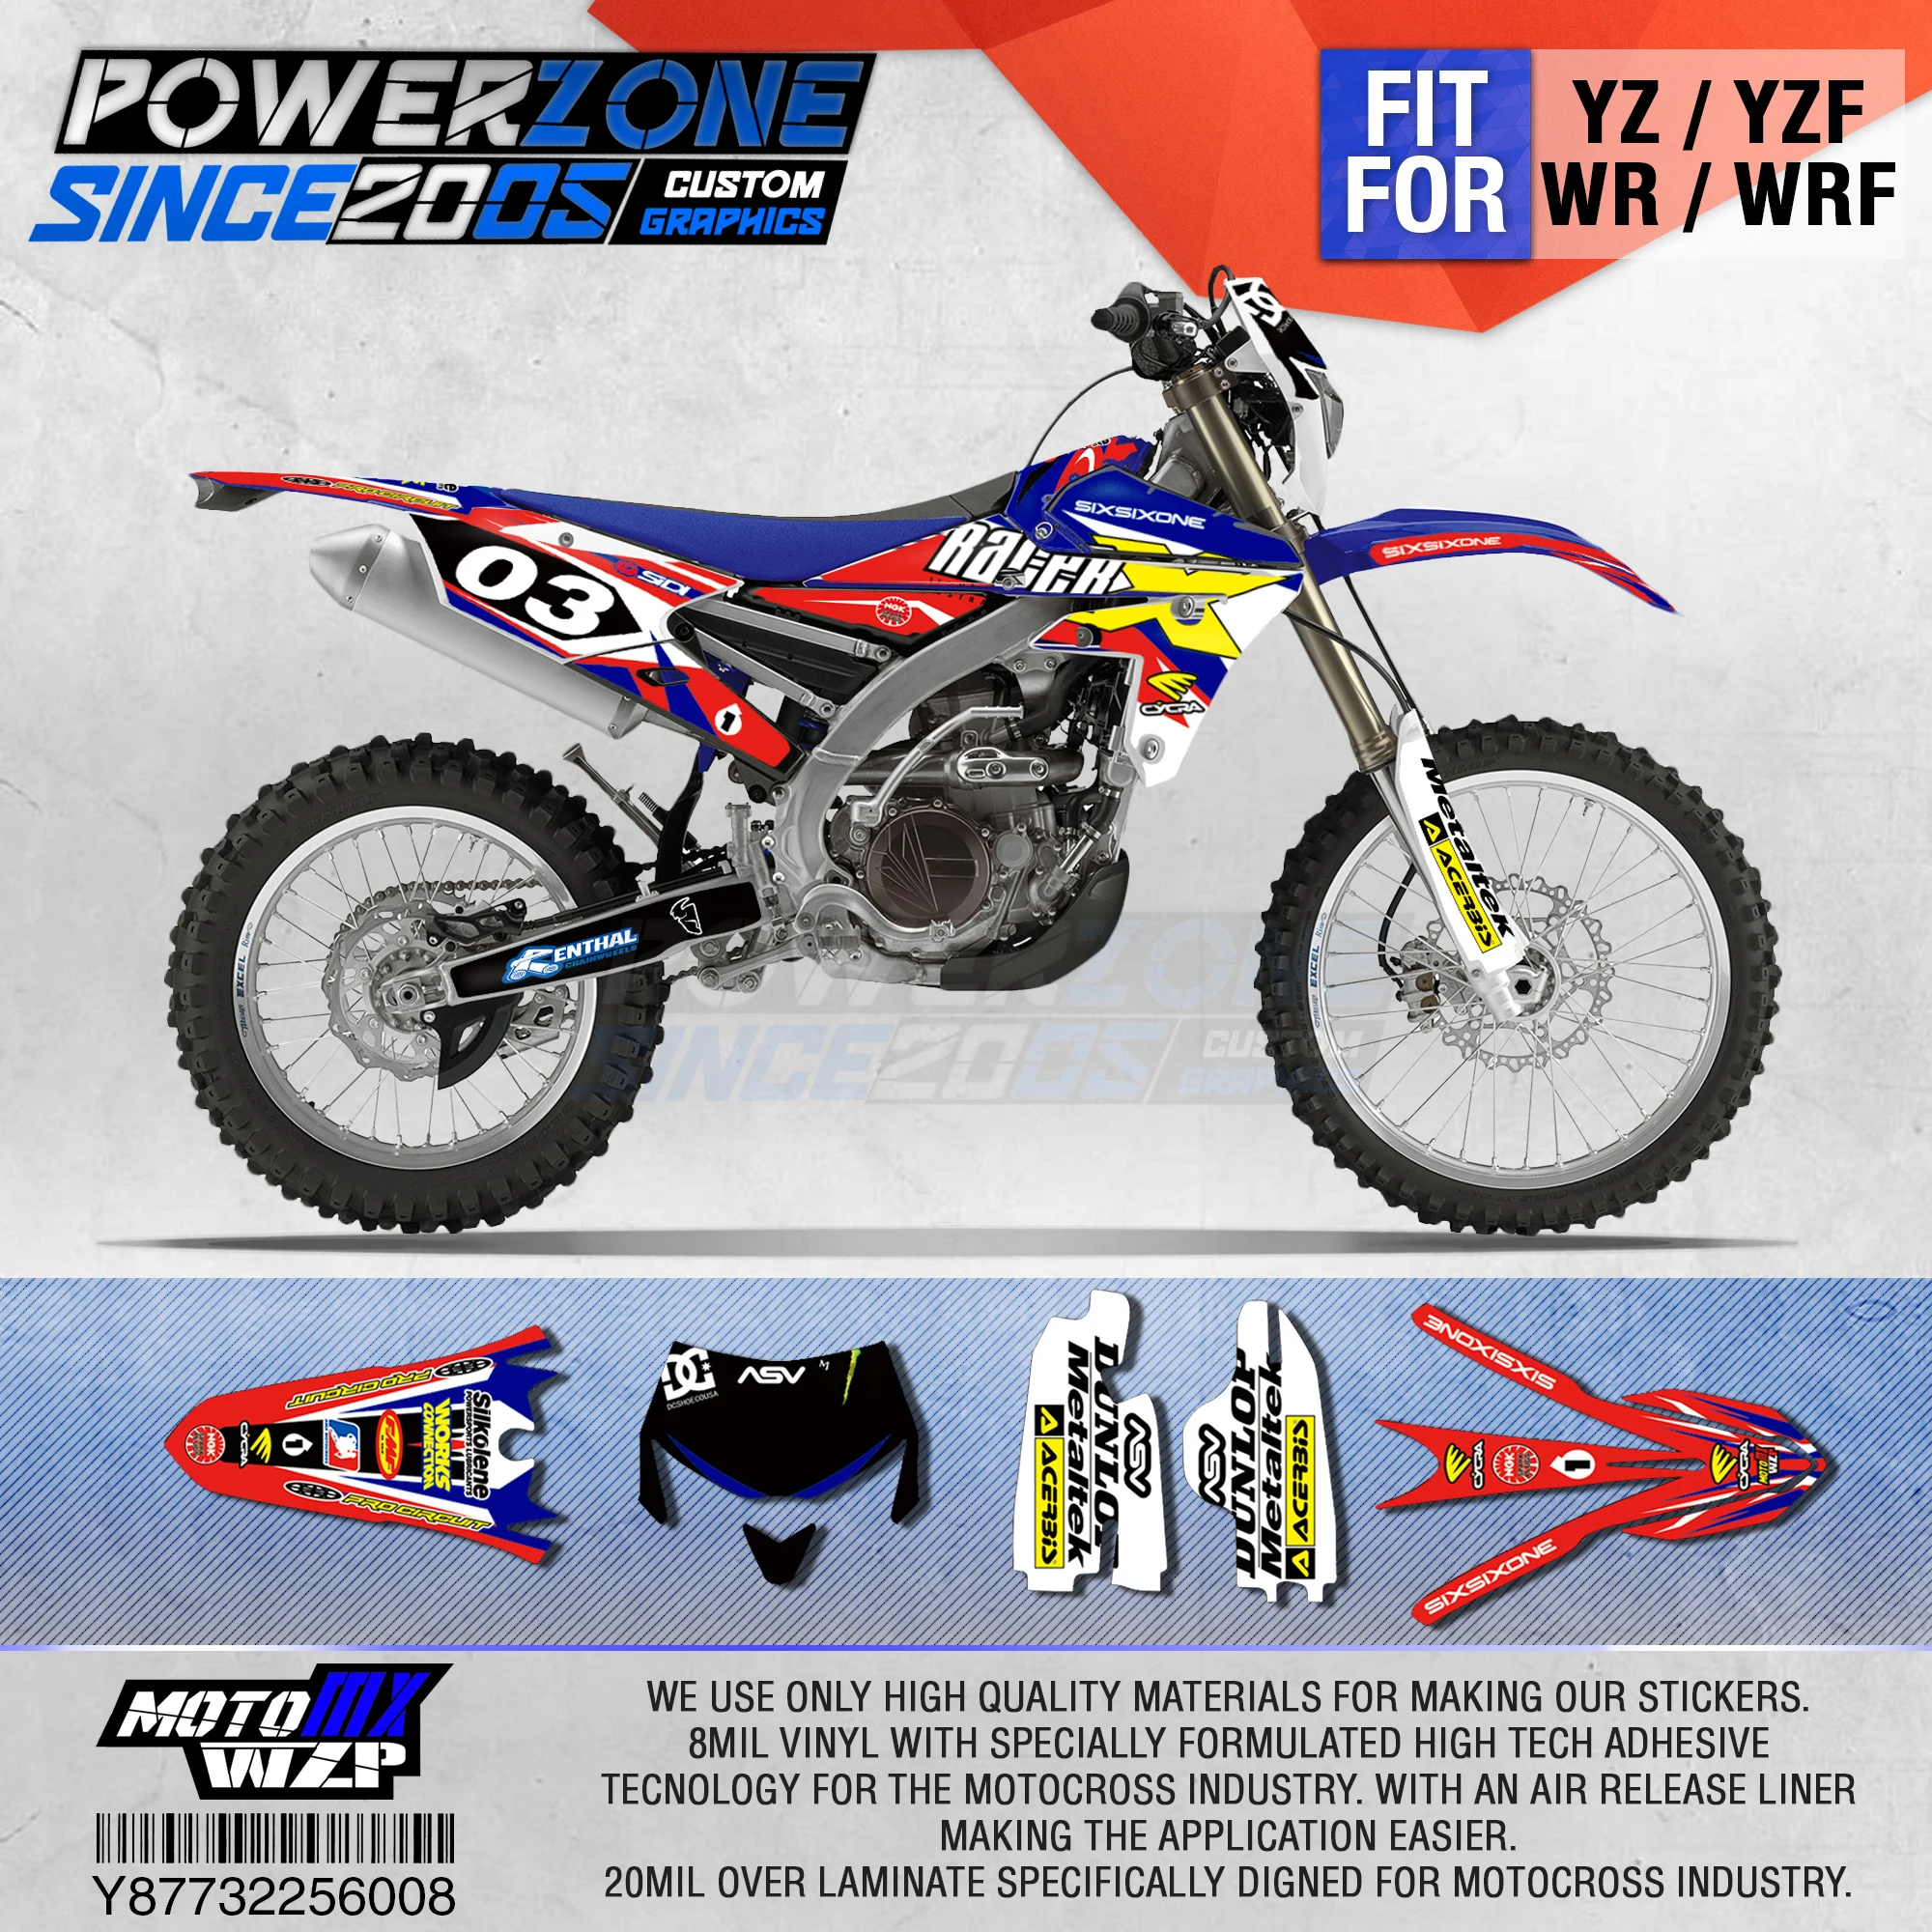 

PowerZone Customized Team Graphics Backgrounds Decals 3M Custom Stickers For YAMAHA WR450F WR WRF 450cc 2016 2017 2018 2019 008